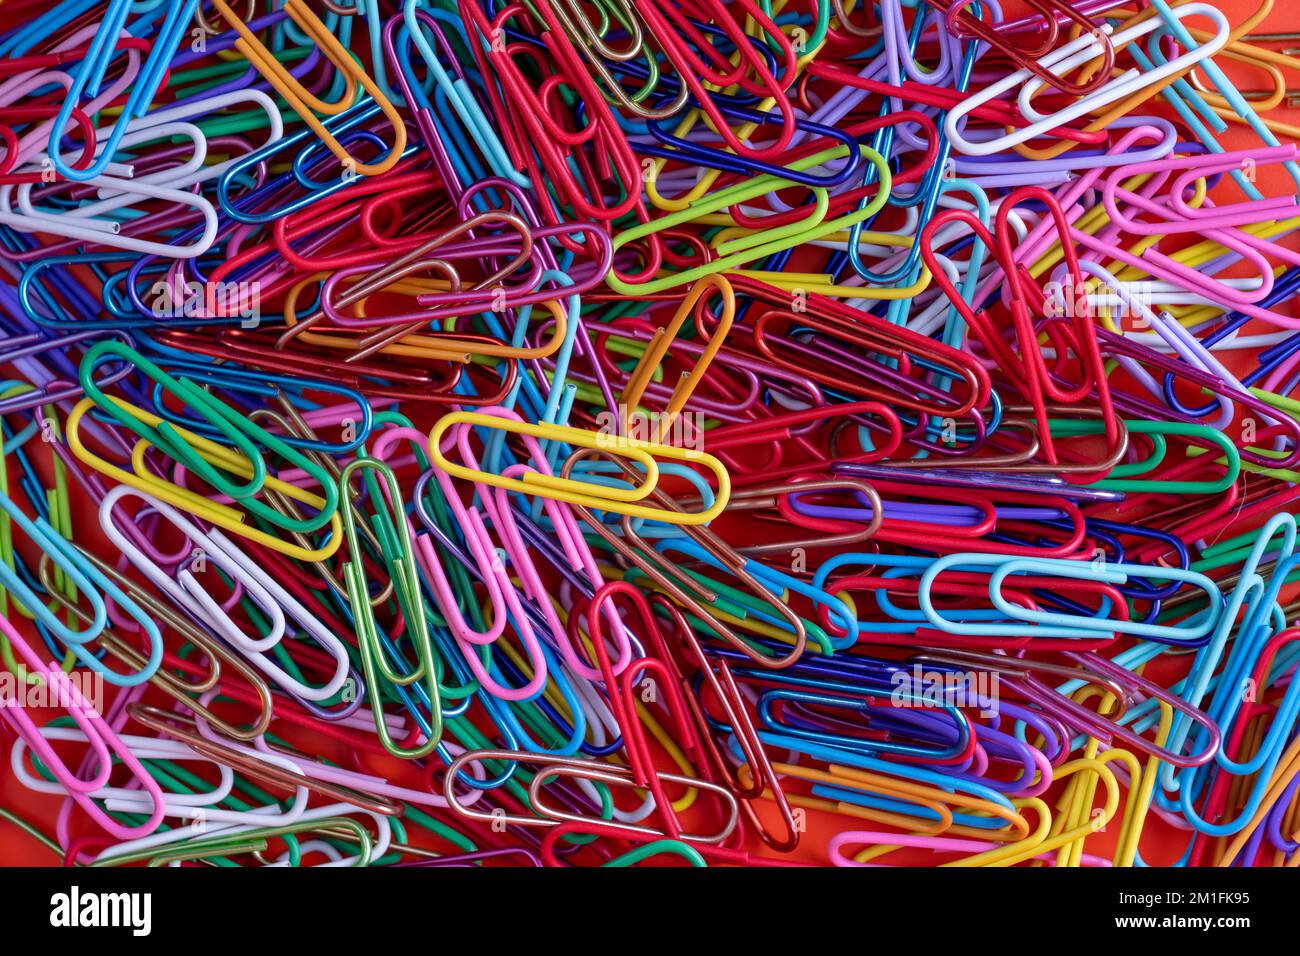 random stack of mutli colored wire plastic coated paper clips on a red background Stock Photo